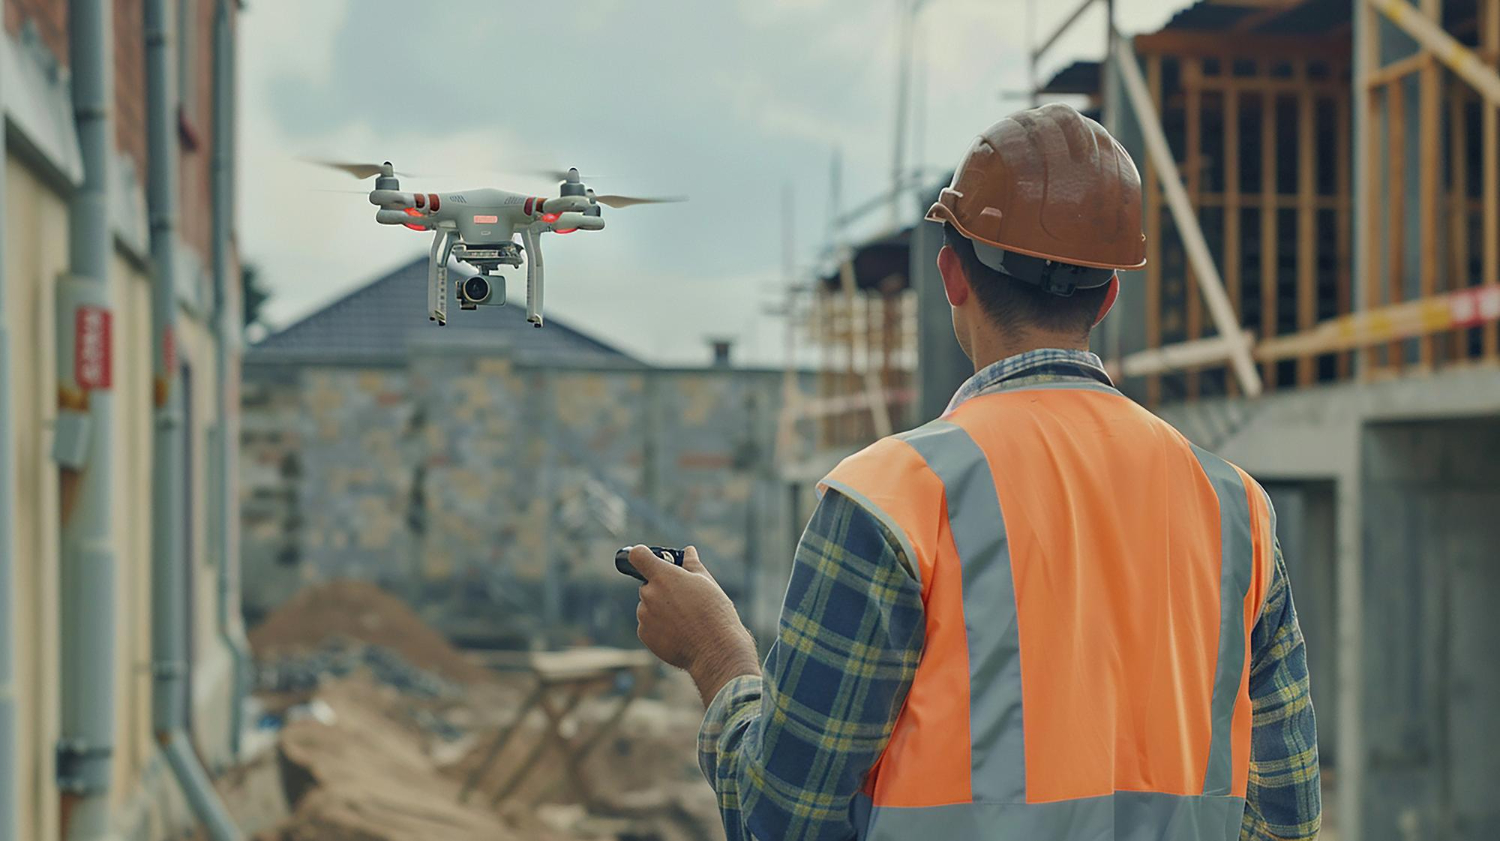 Enhancing Site Safety and Security with Drones